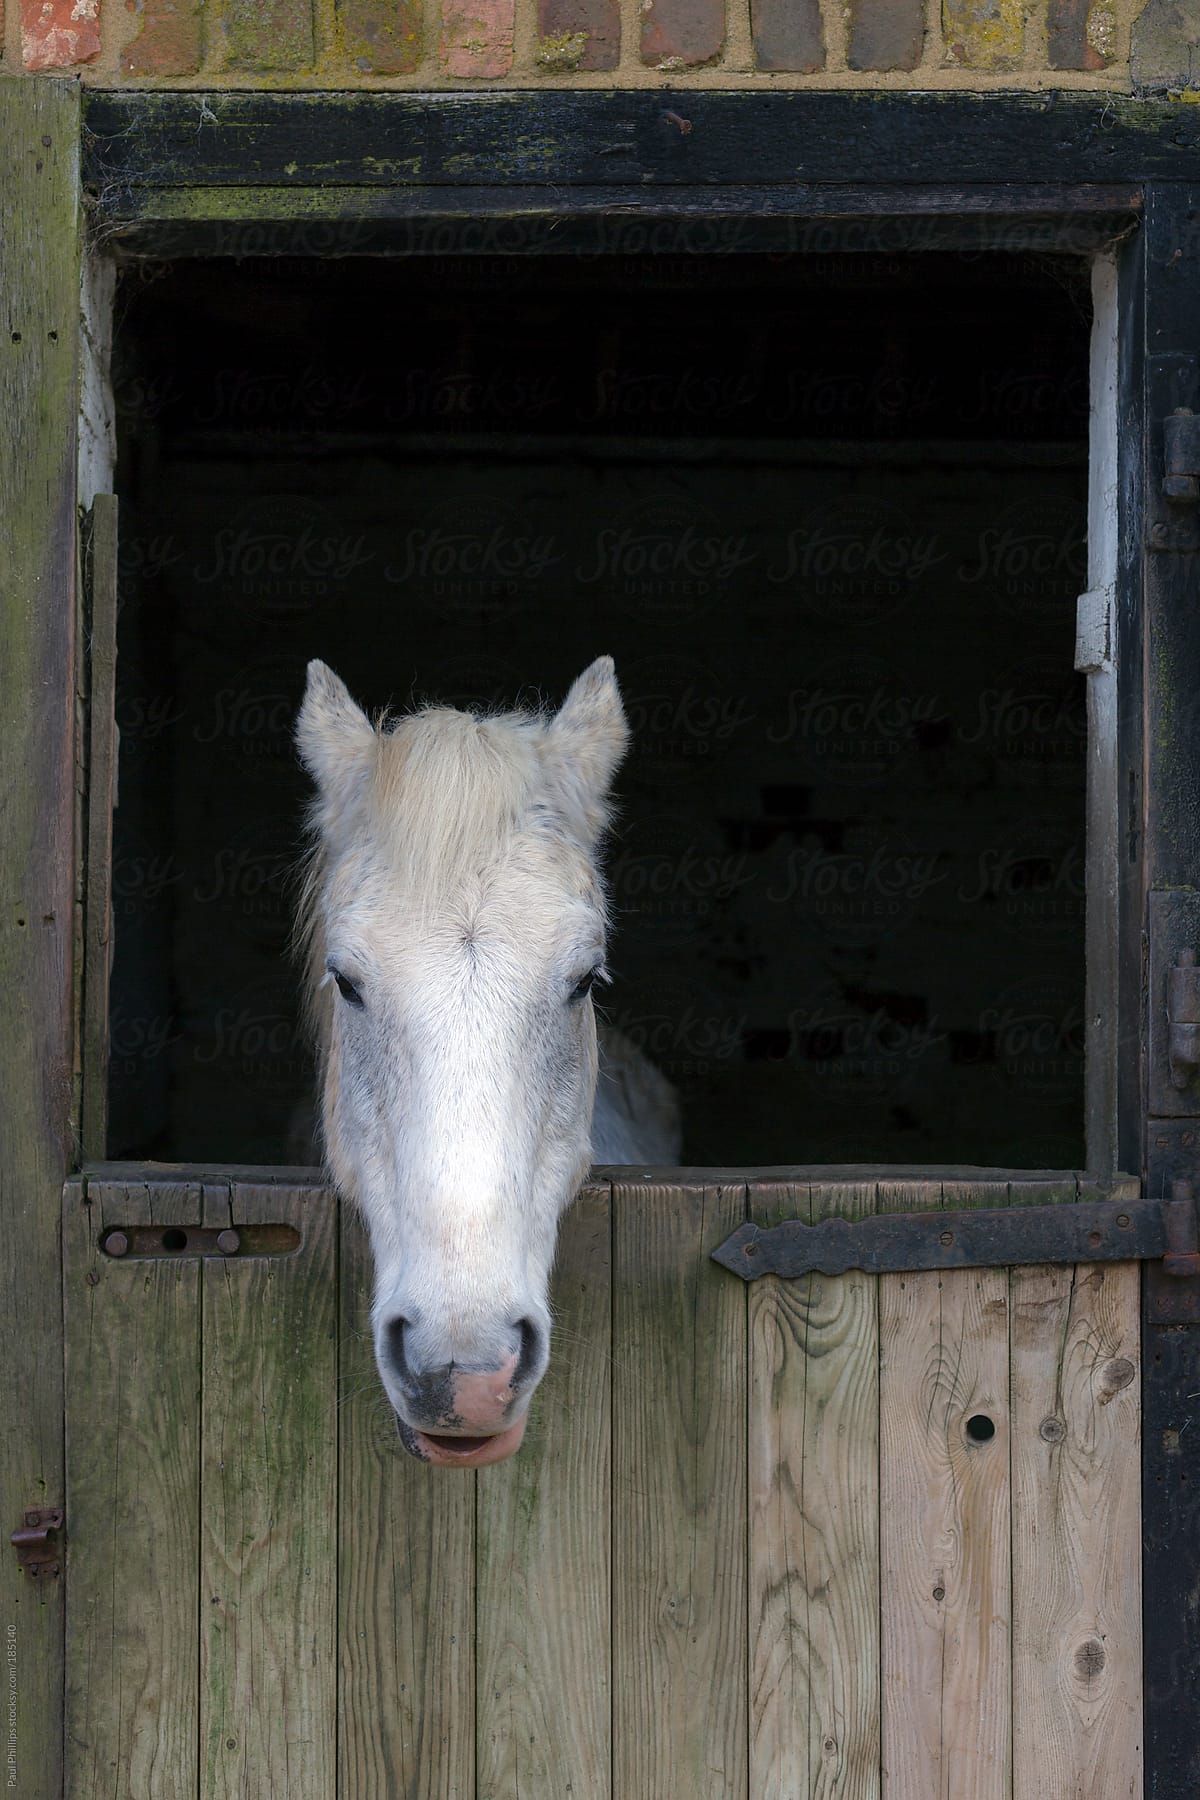 White horse head looking out from stable door